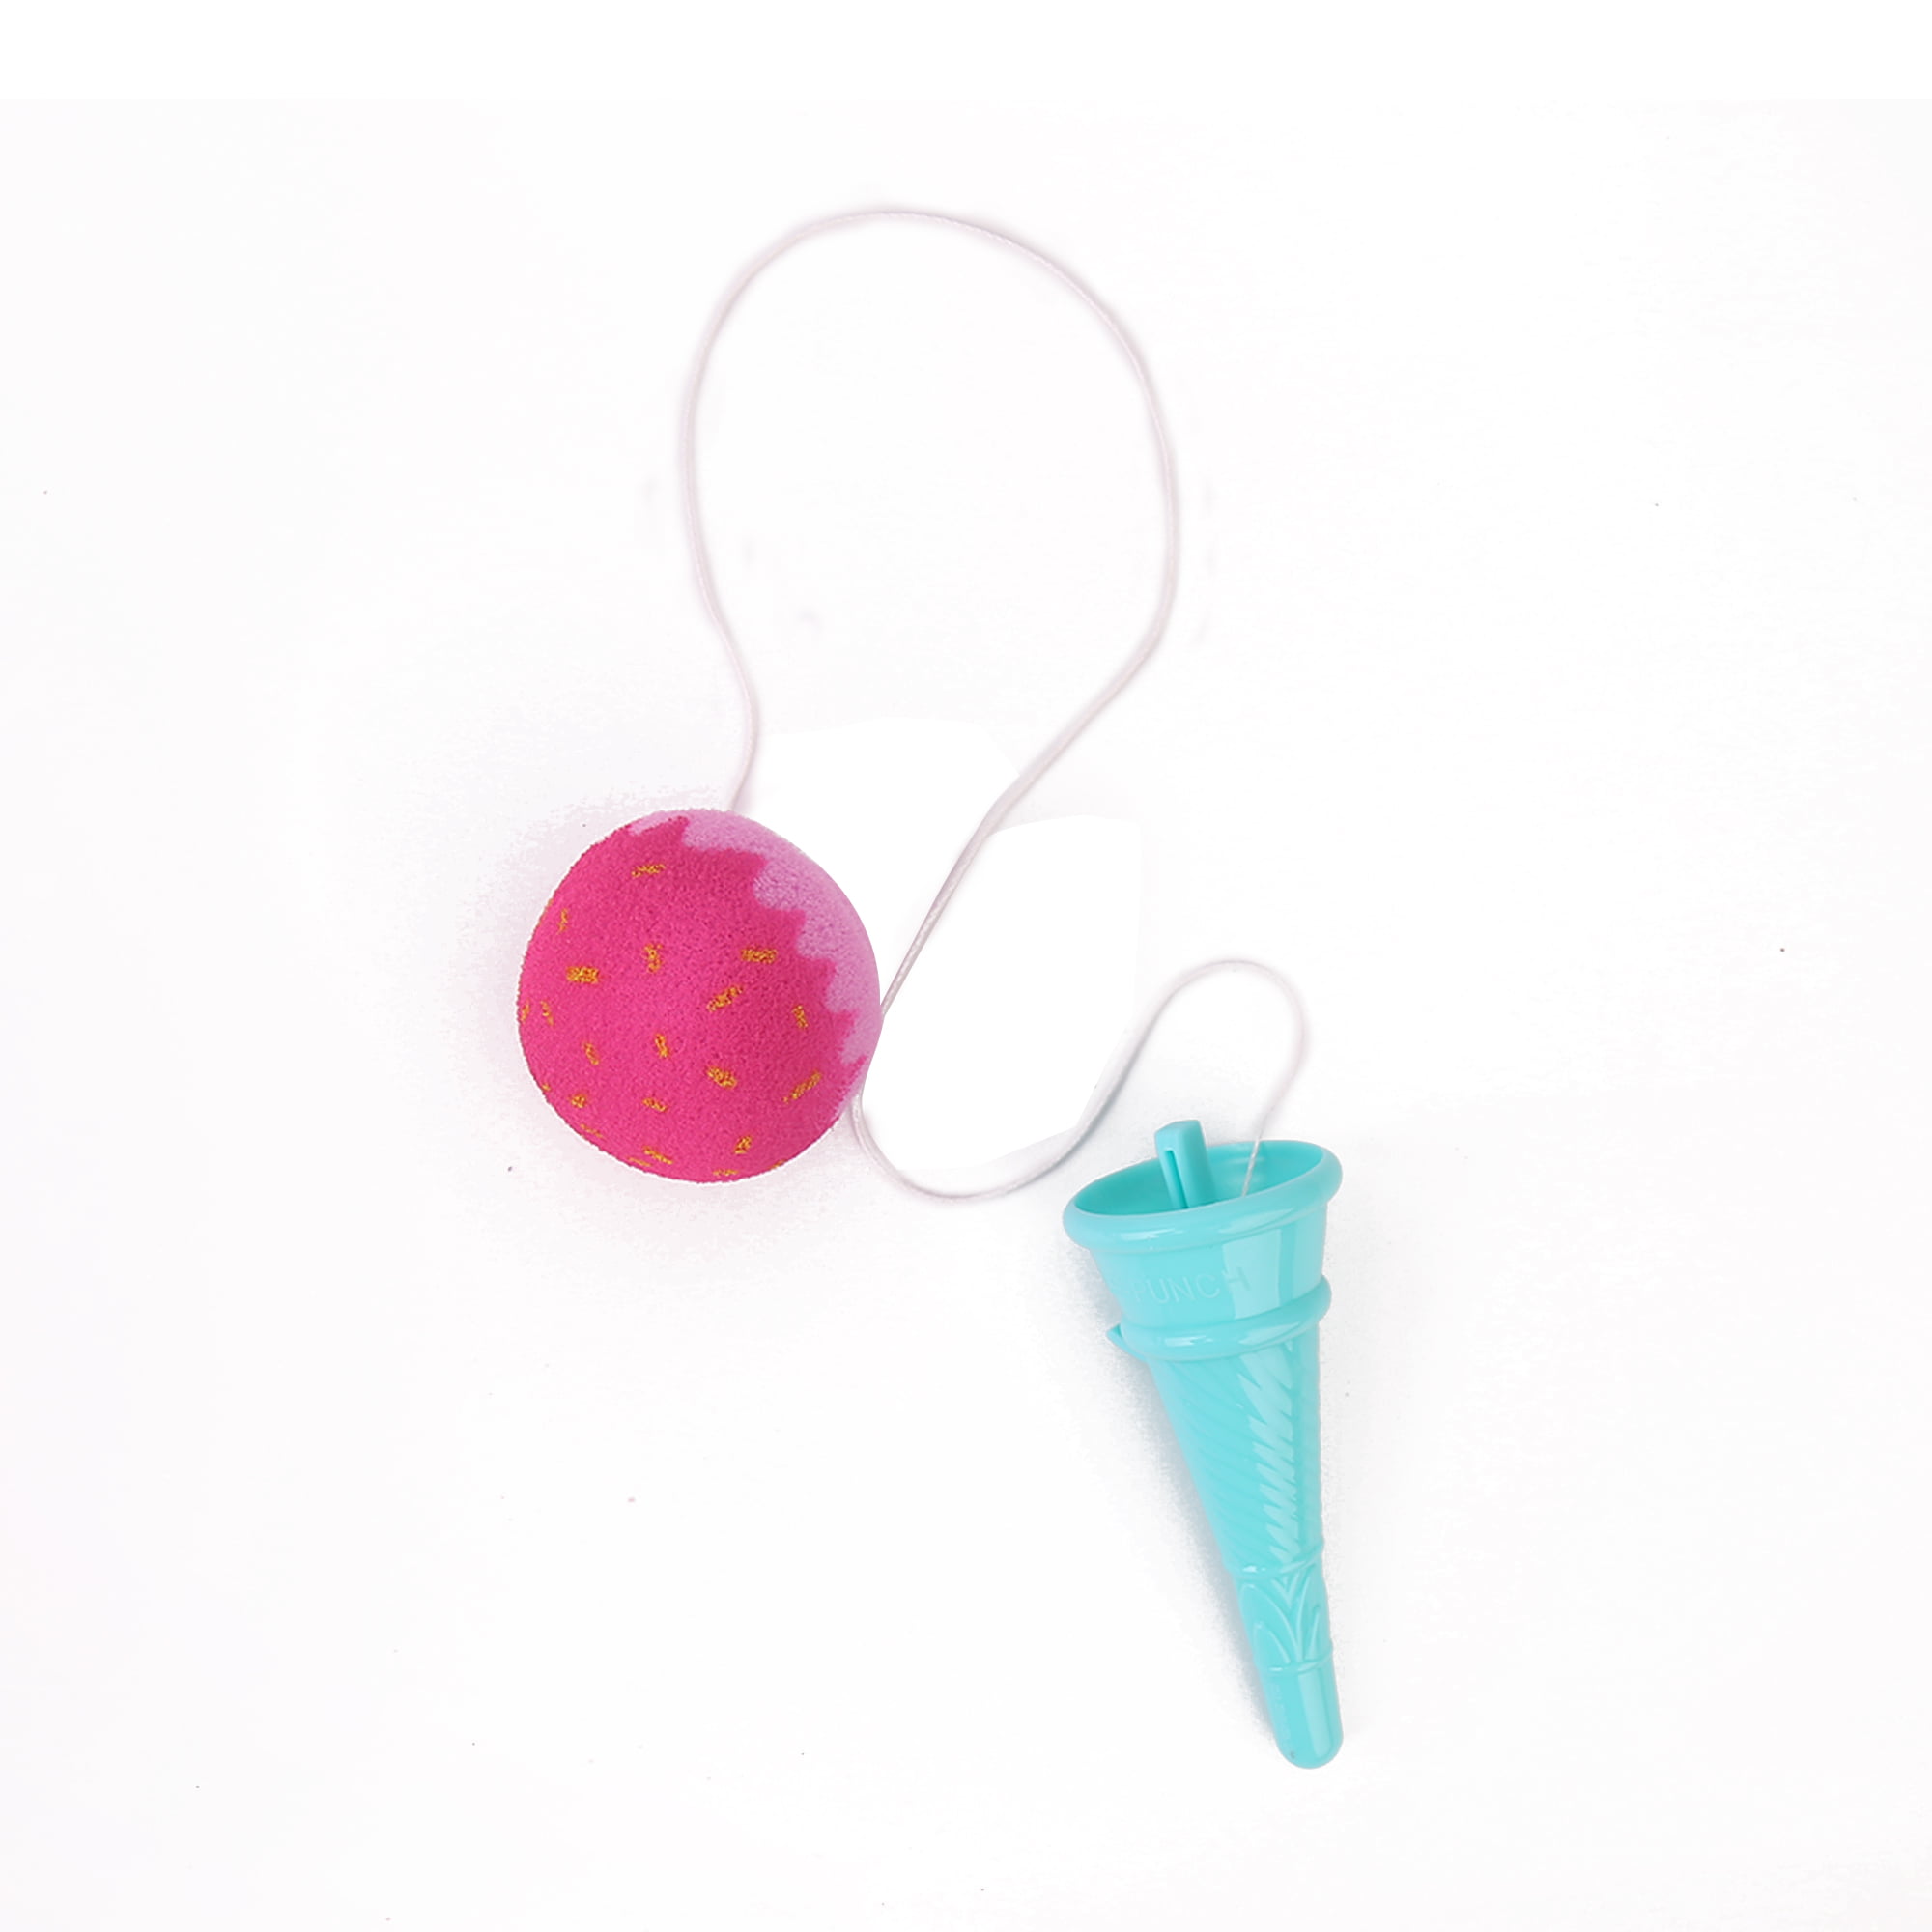 8 Ice Cream Scoop Spoon Cone Shaped Plastic Children Party Favors Baby  Serving 